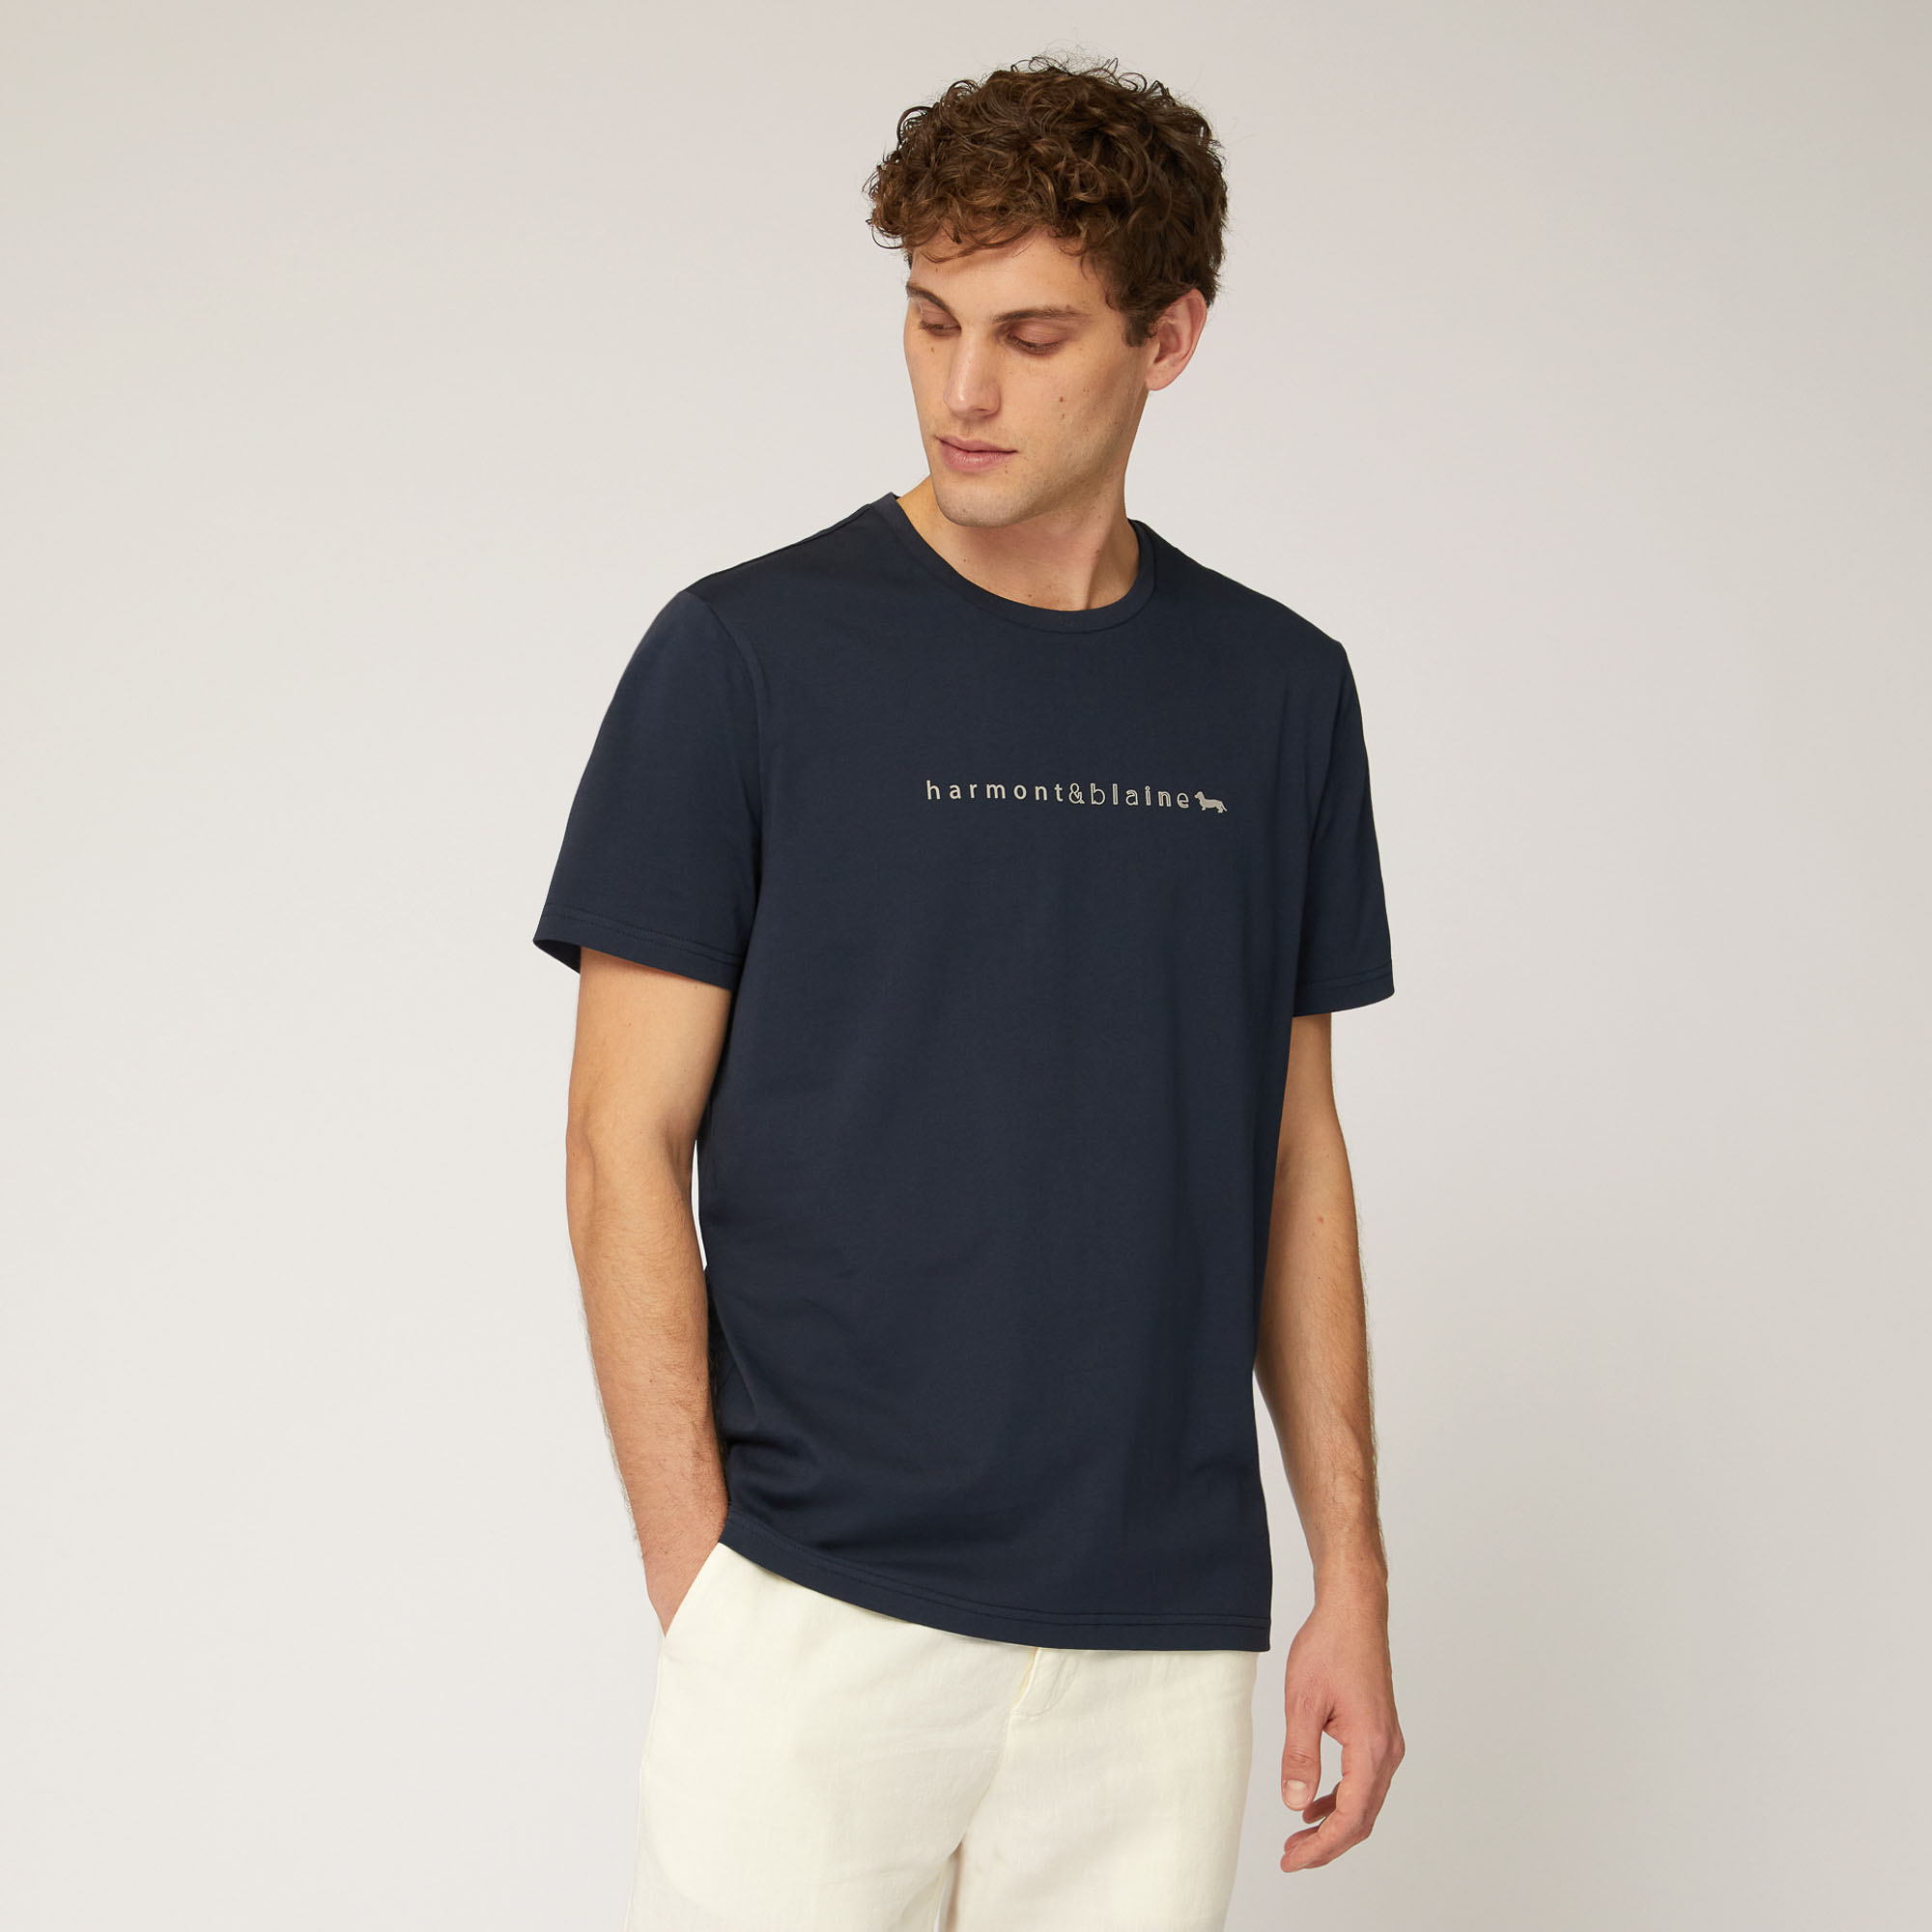 T-Shirt Con Lettering E Logo, Blu Navy, large image number 0